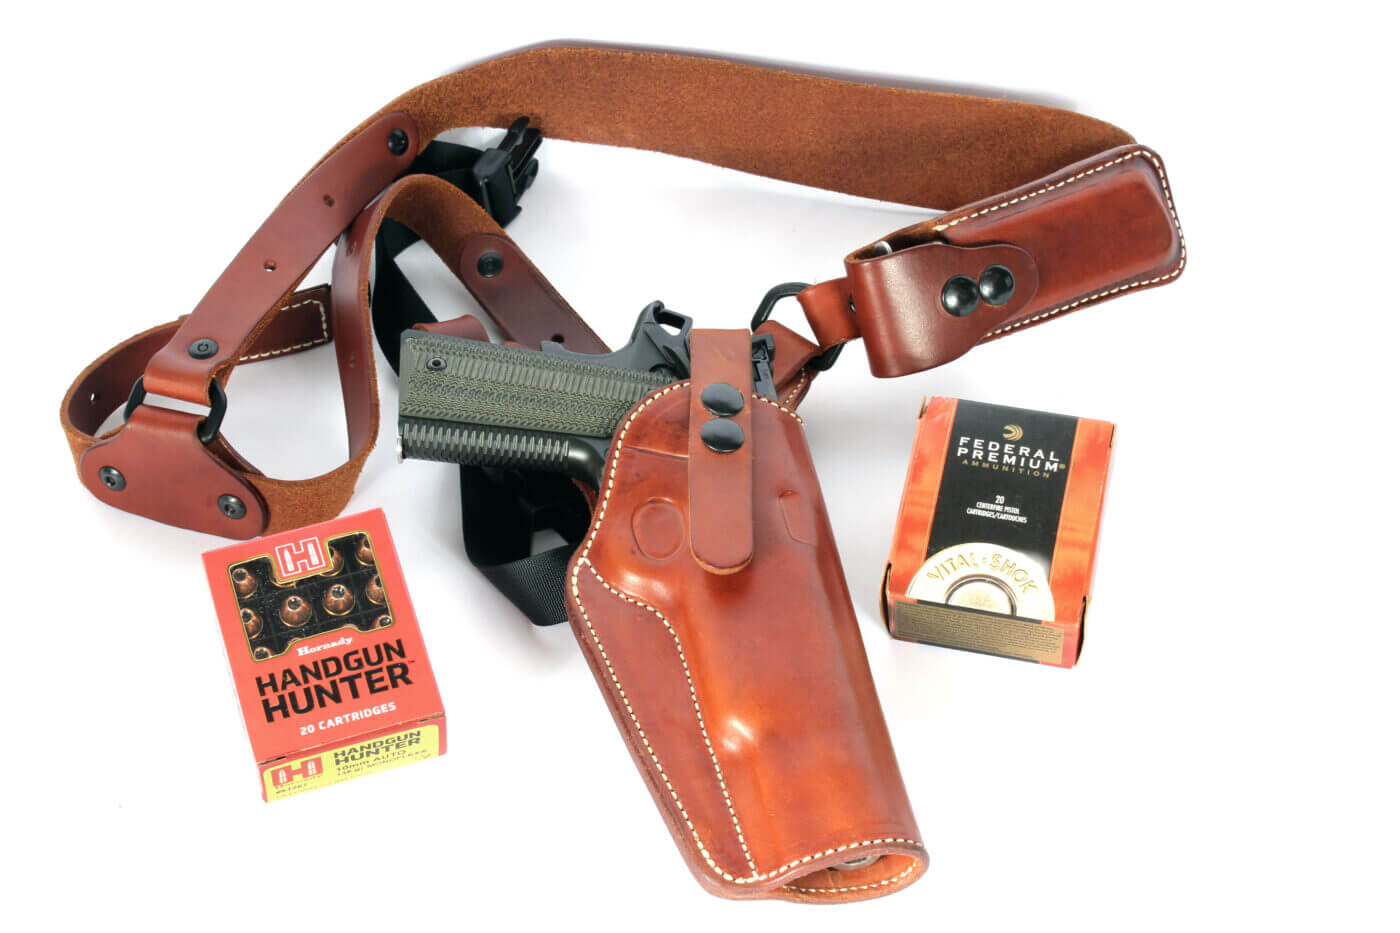 The Denali Chest Holster - MADE IN THE USA - The ULTIMATE gun holster